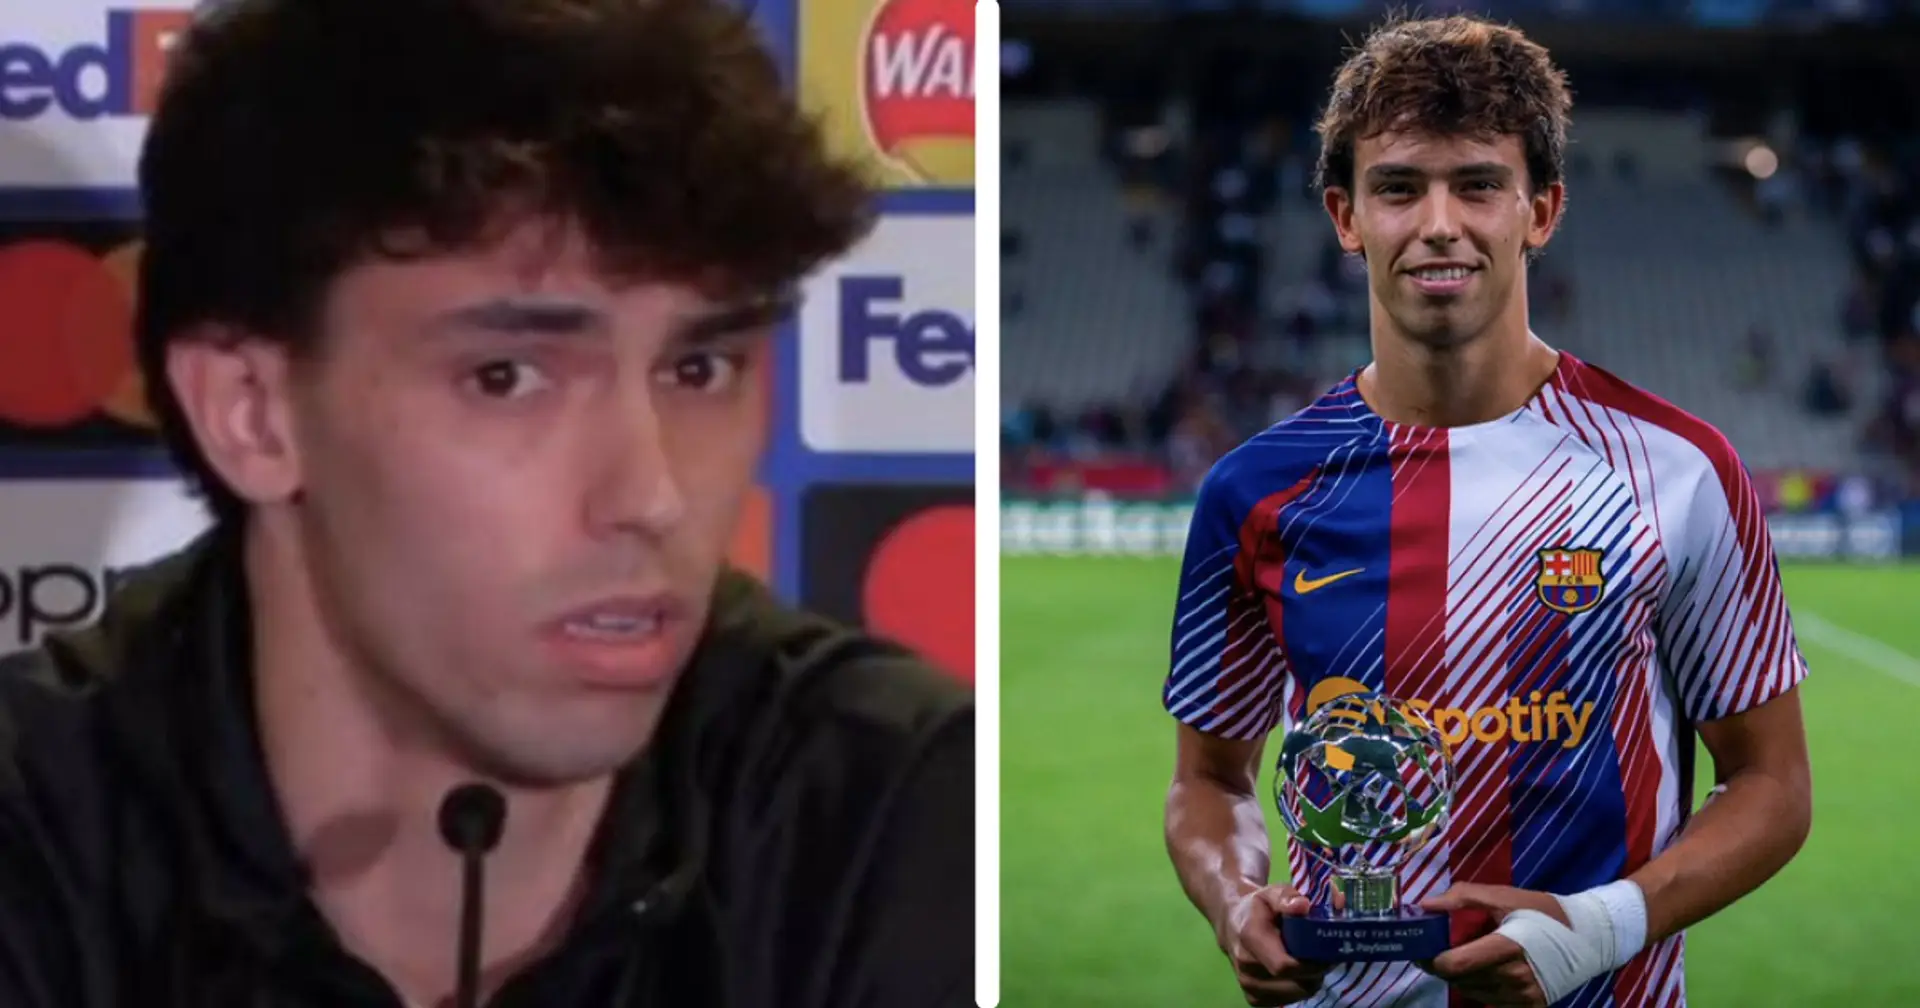 Joao Felix delivers classy response to receiving Man of the Match award v Antwerp